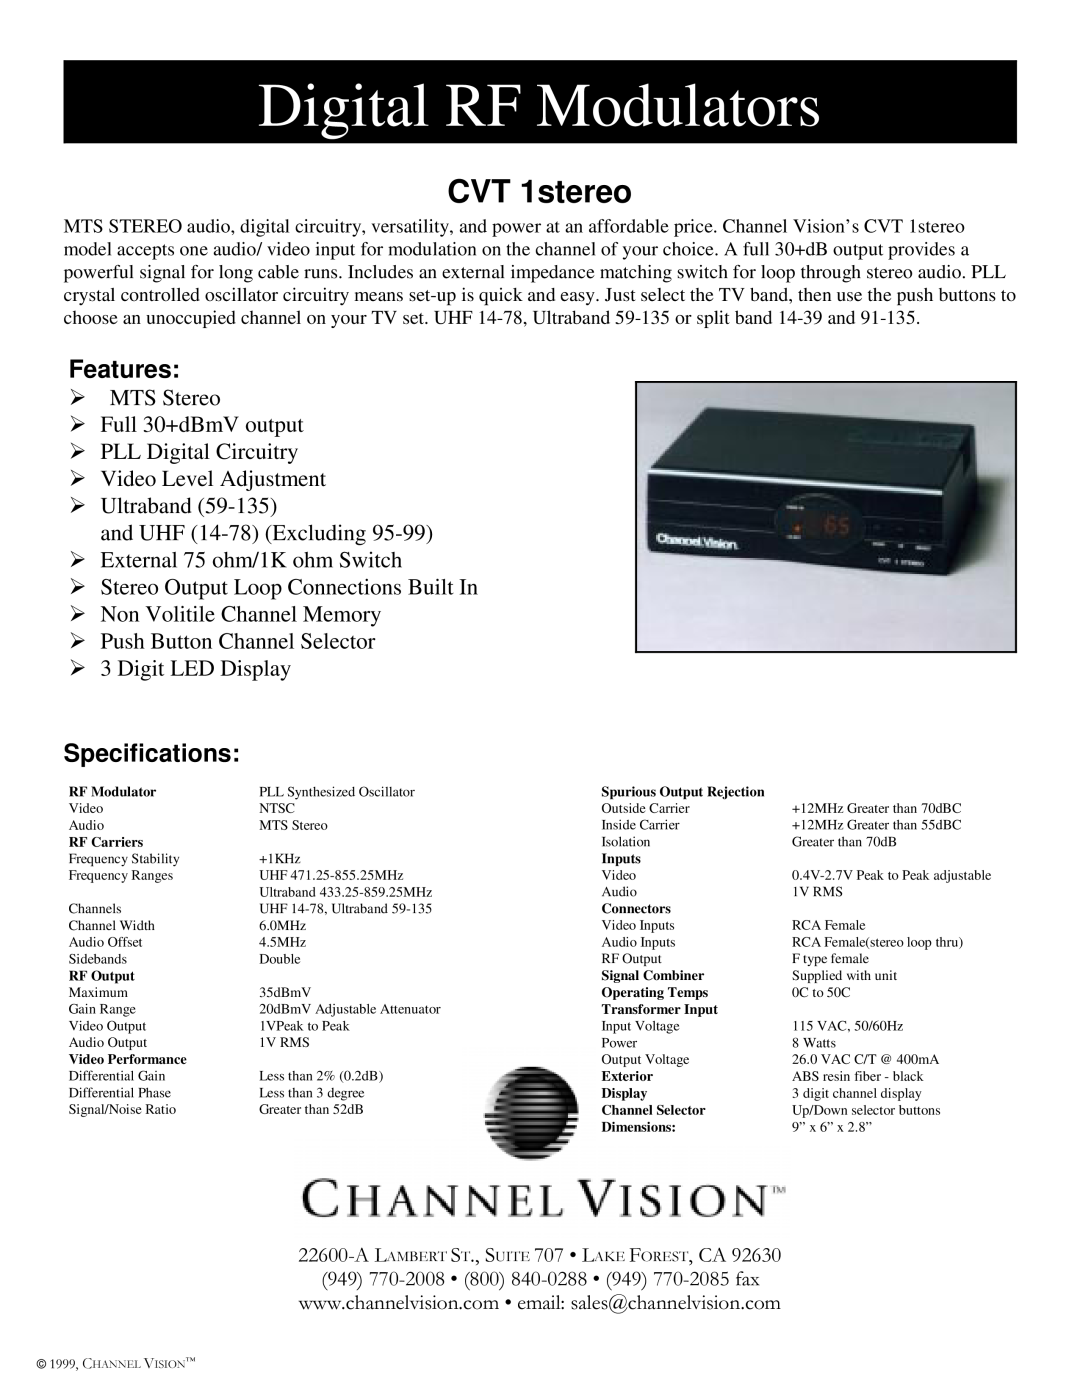 Channel Vision CVT 1stereo specifications Digital RF Modulators, +$11/,6,21, Features, Specifications, ‡‡Id 